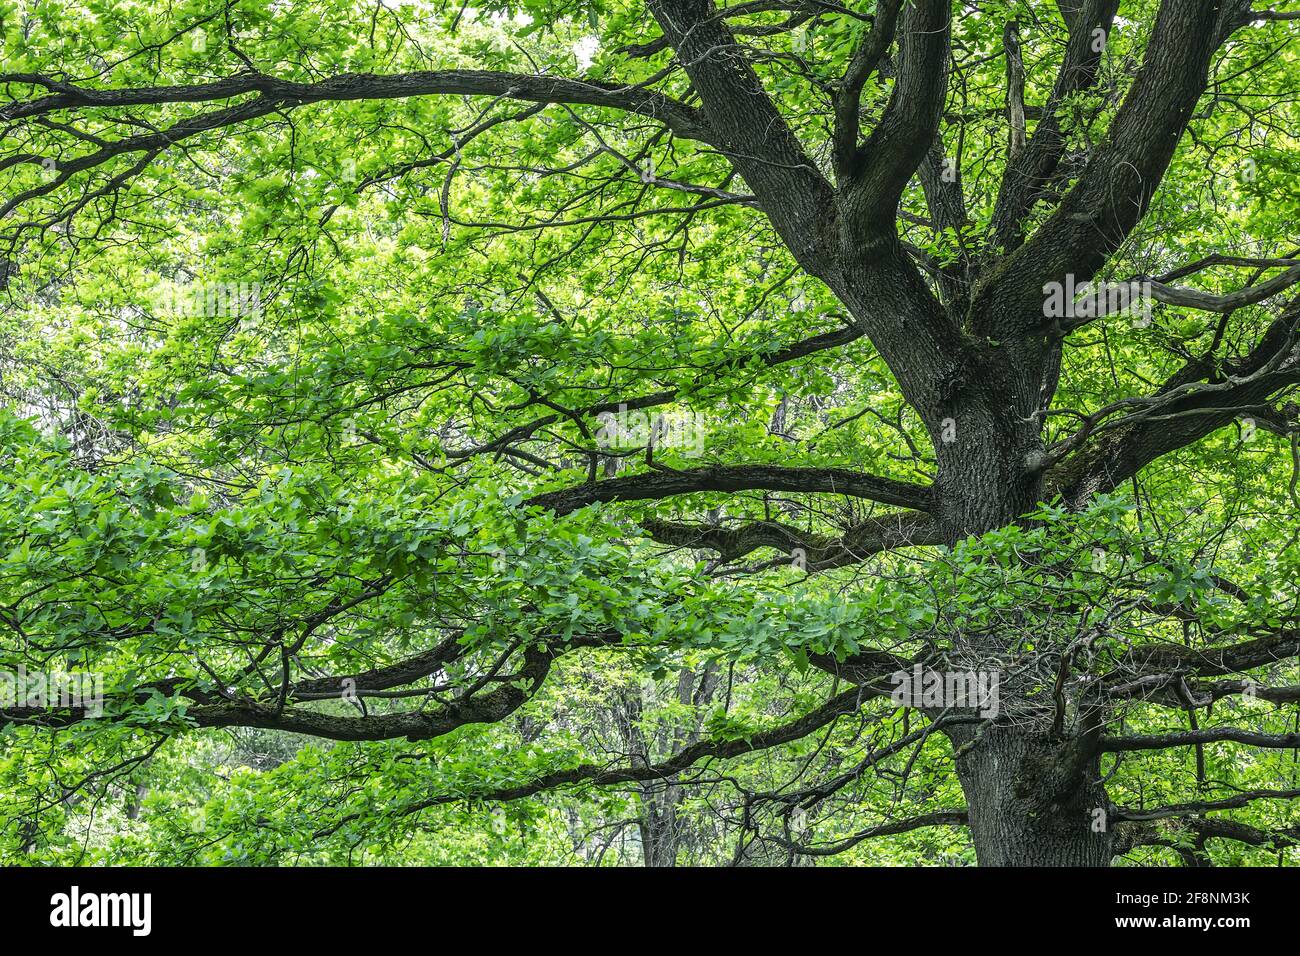 very old big oak tree with green lush foliage. nature scenic spring landscape photography. Stock Photo